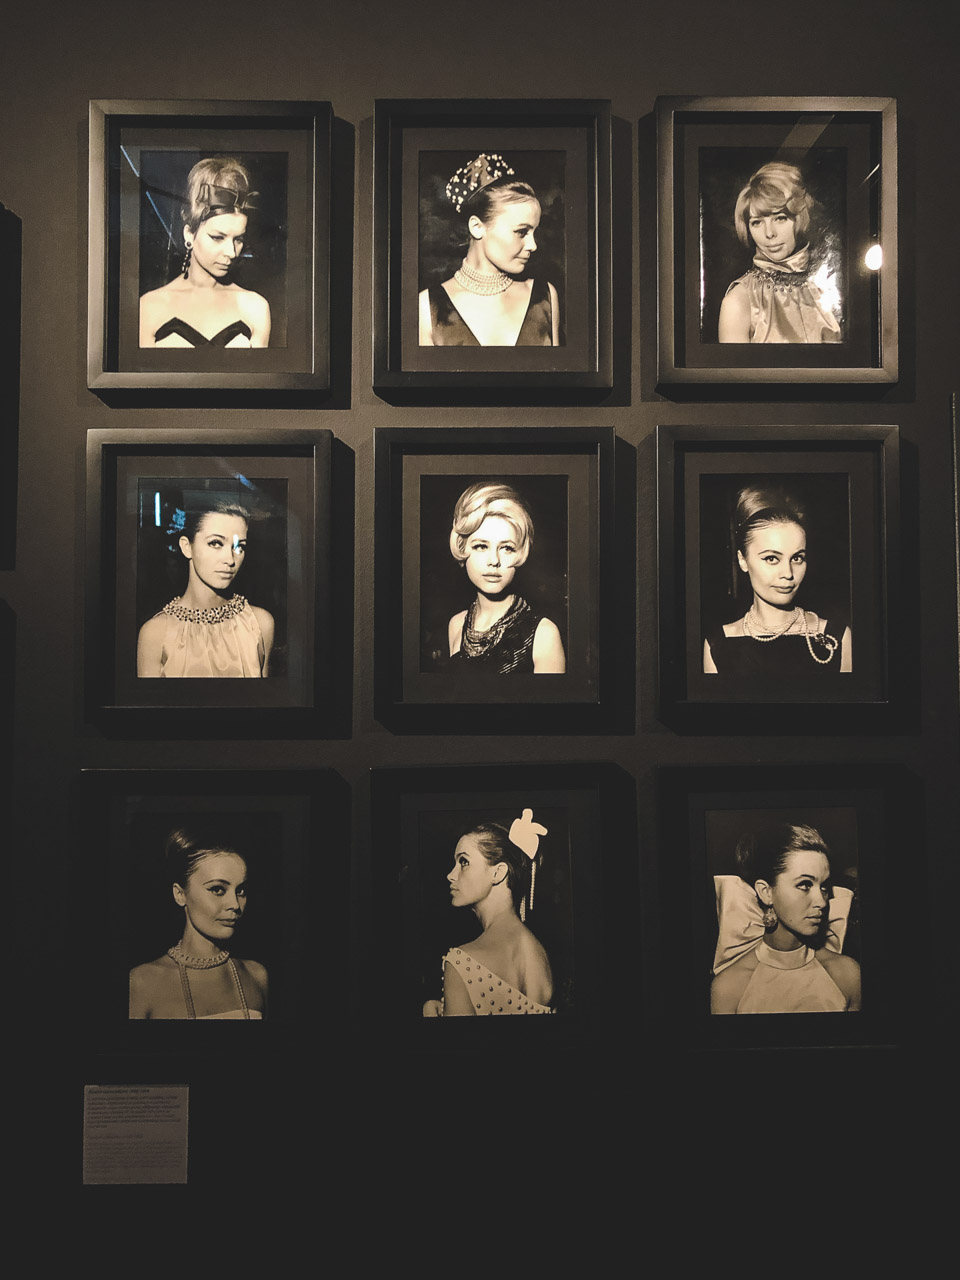 Old photos of models on display at The Central Museum of Textiles in Łódź, Poland